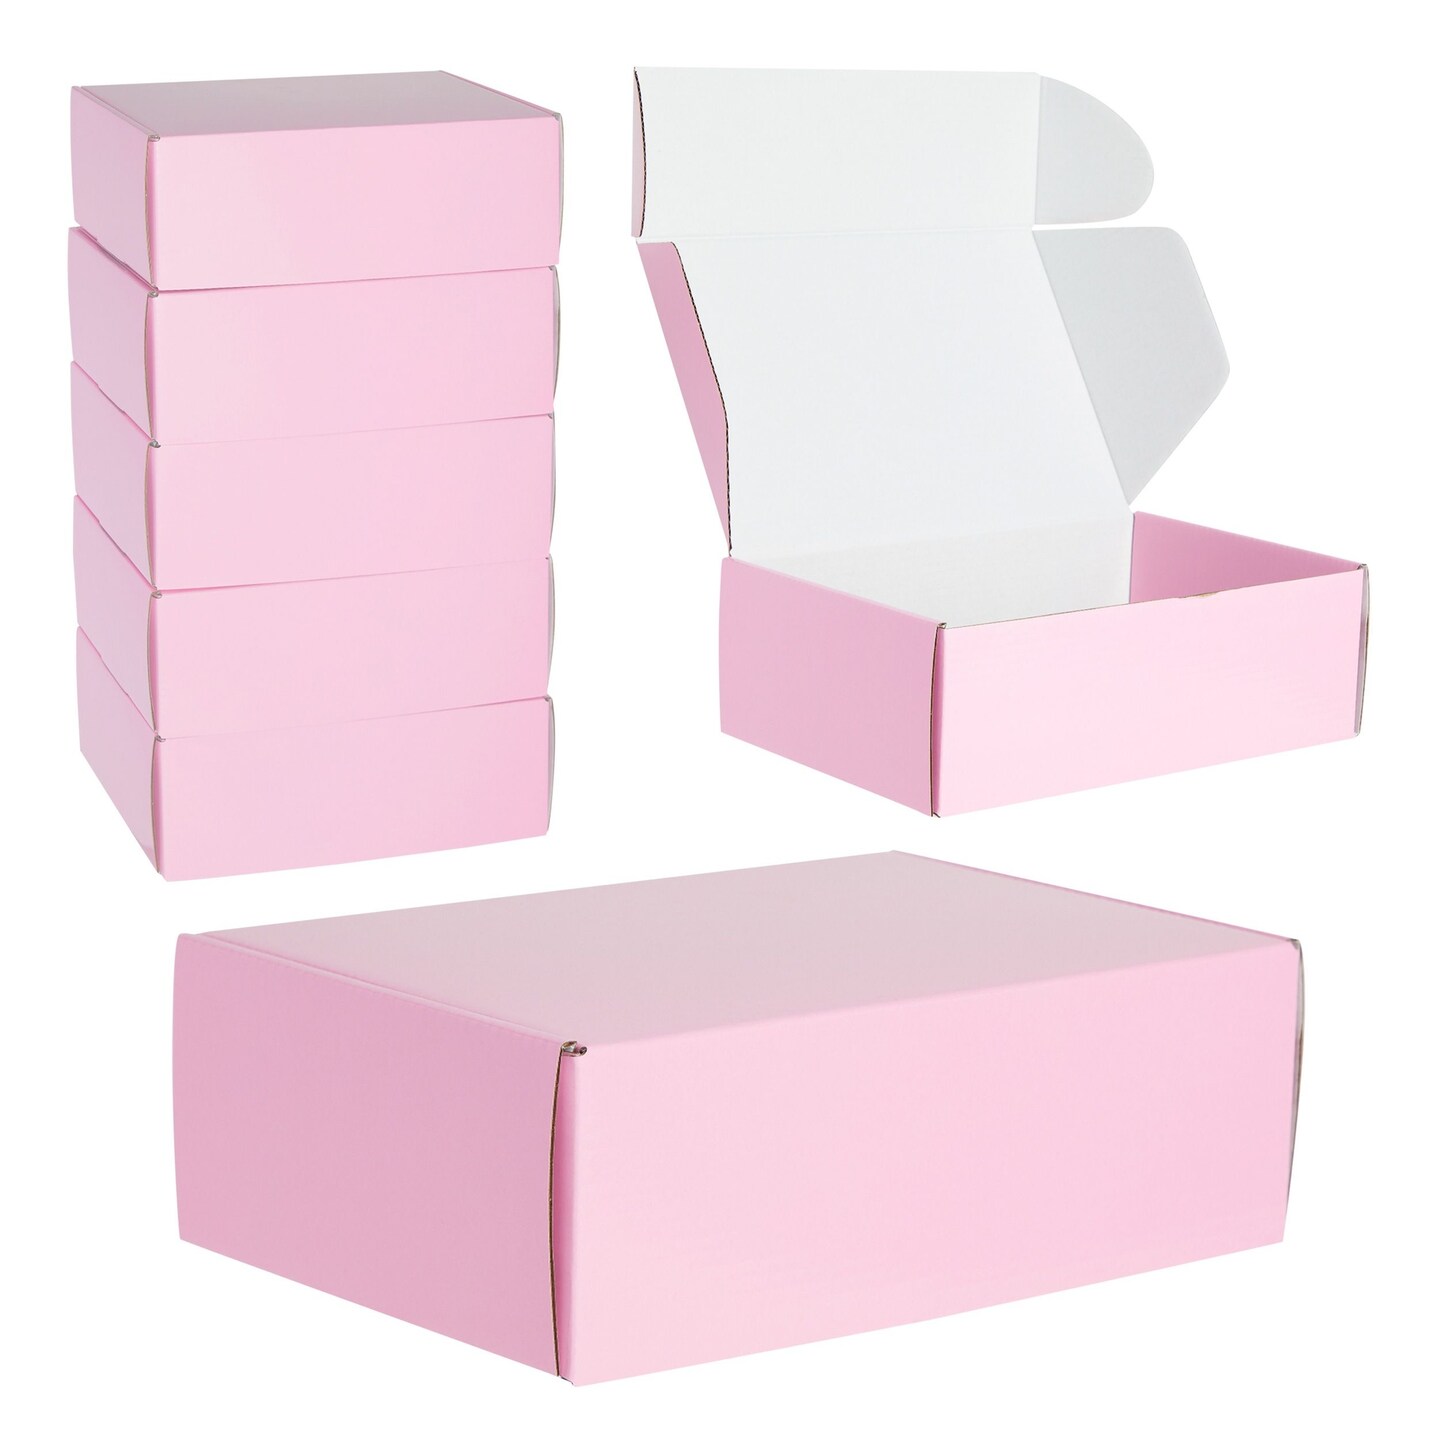 25 Pack Corrugated Packaging Boxes for Shipping, Cardboard Mailers for Small Business, Boutiques, Mailing Gifts, Gift Boxes for Wedding Reception, Bridal Shower (Pink, 9 x 6 x 3 Inches)